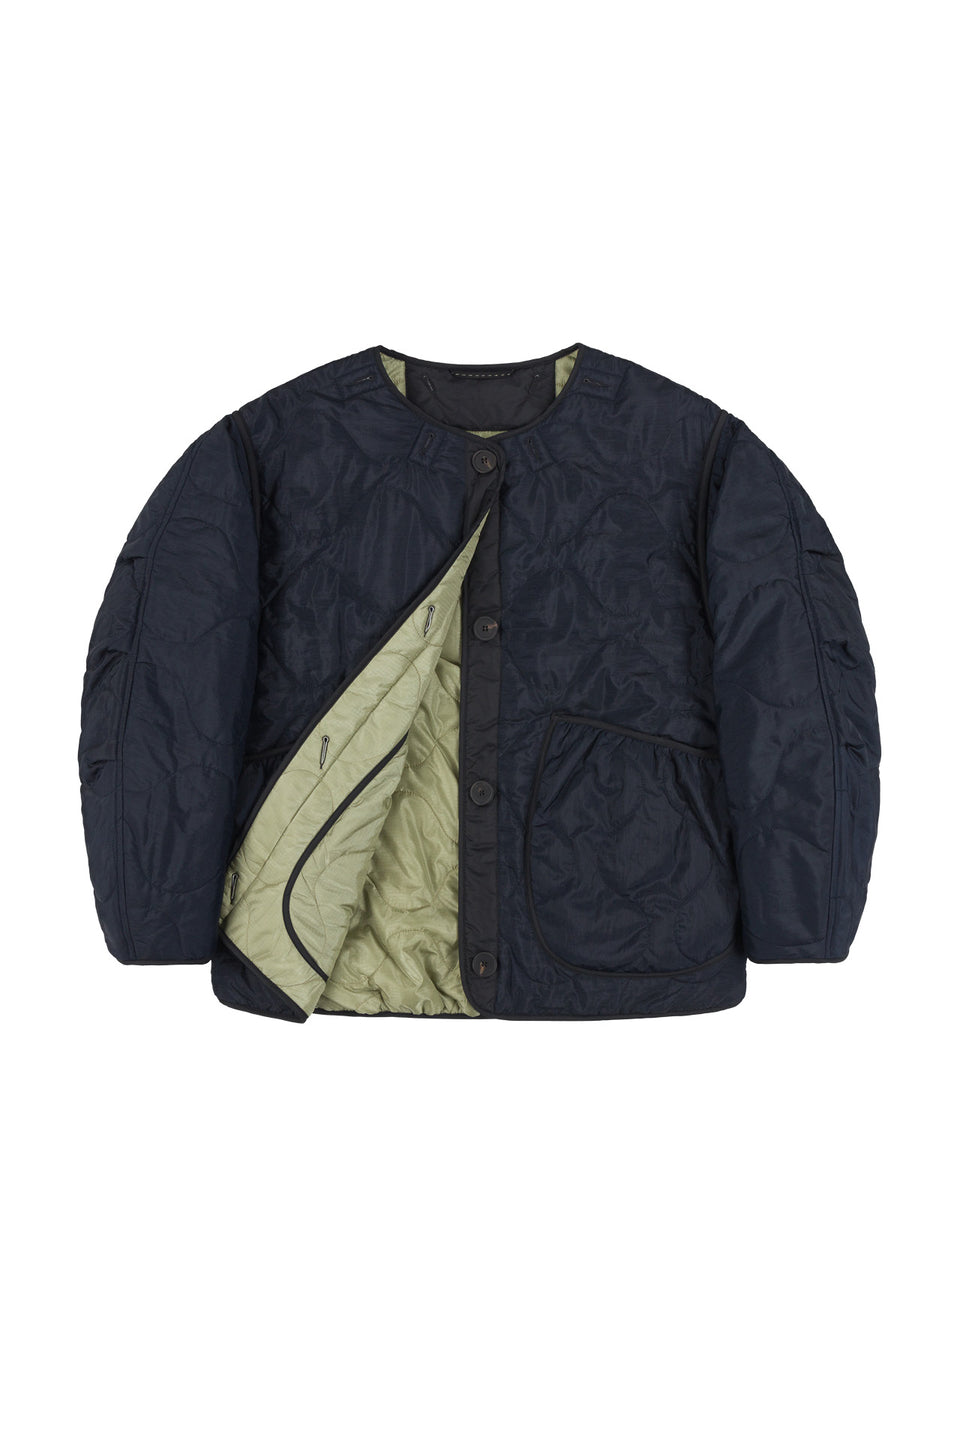 Cropped Quilt Jacket - Navy / Pale Sage (listing page thumbnail)